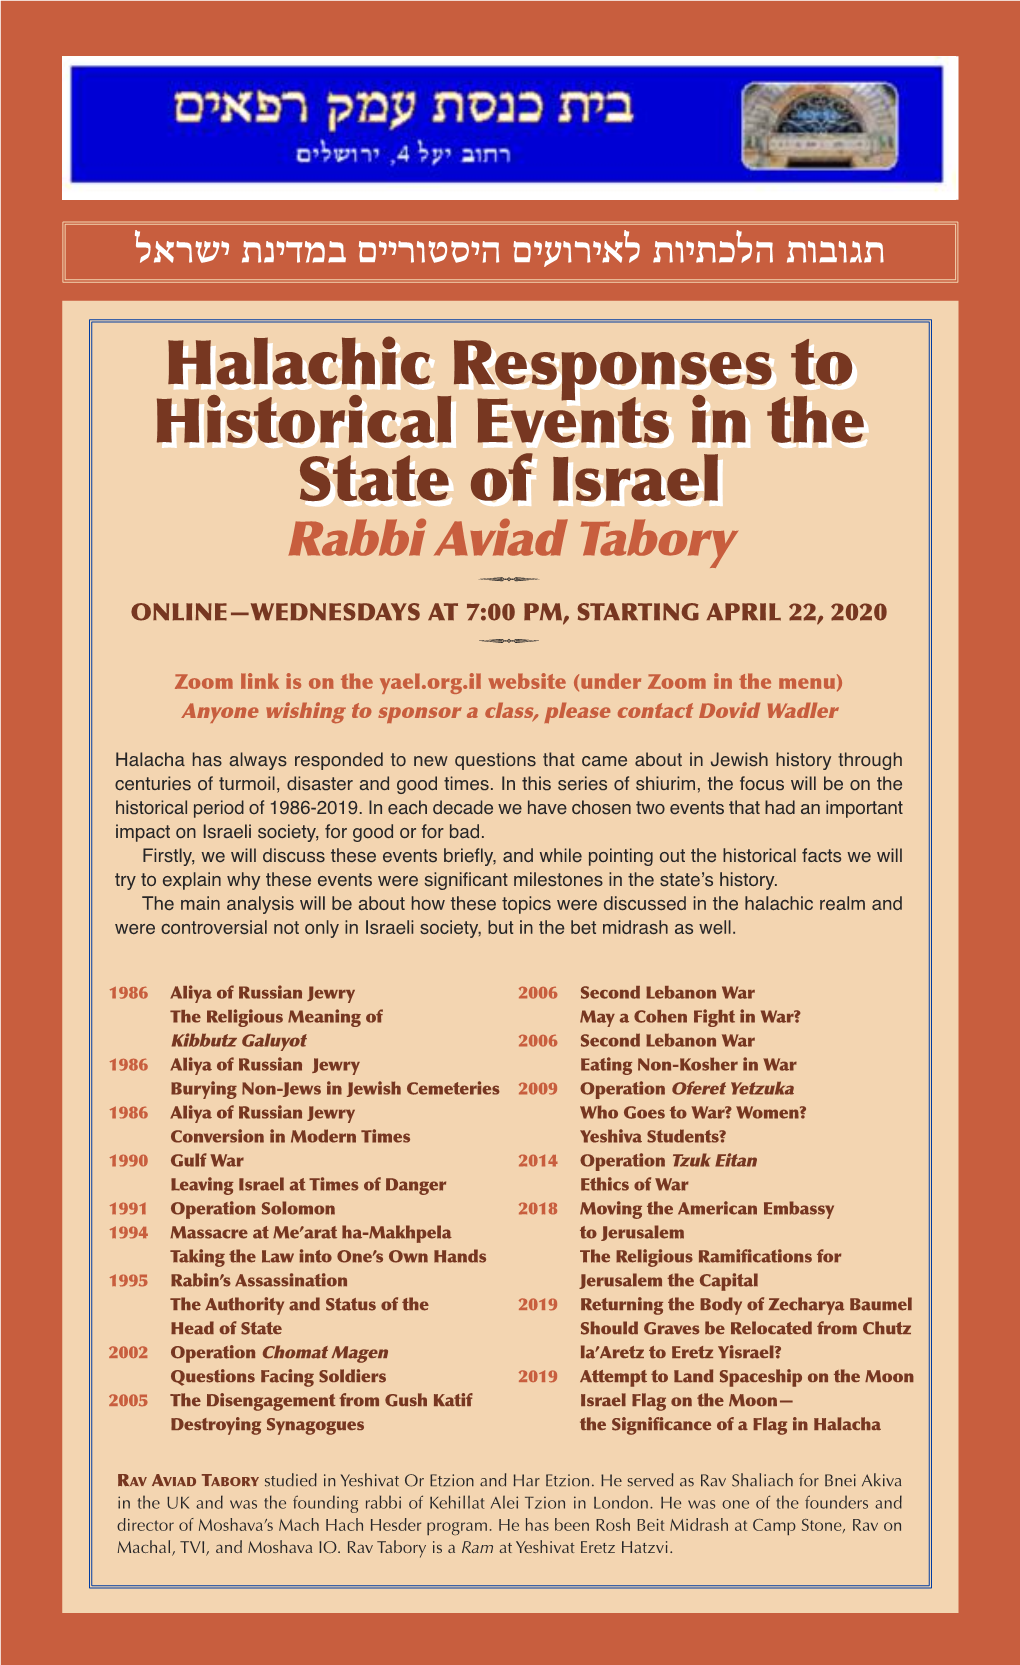 Halachic Responses to Historical Events in the State of Israel